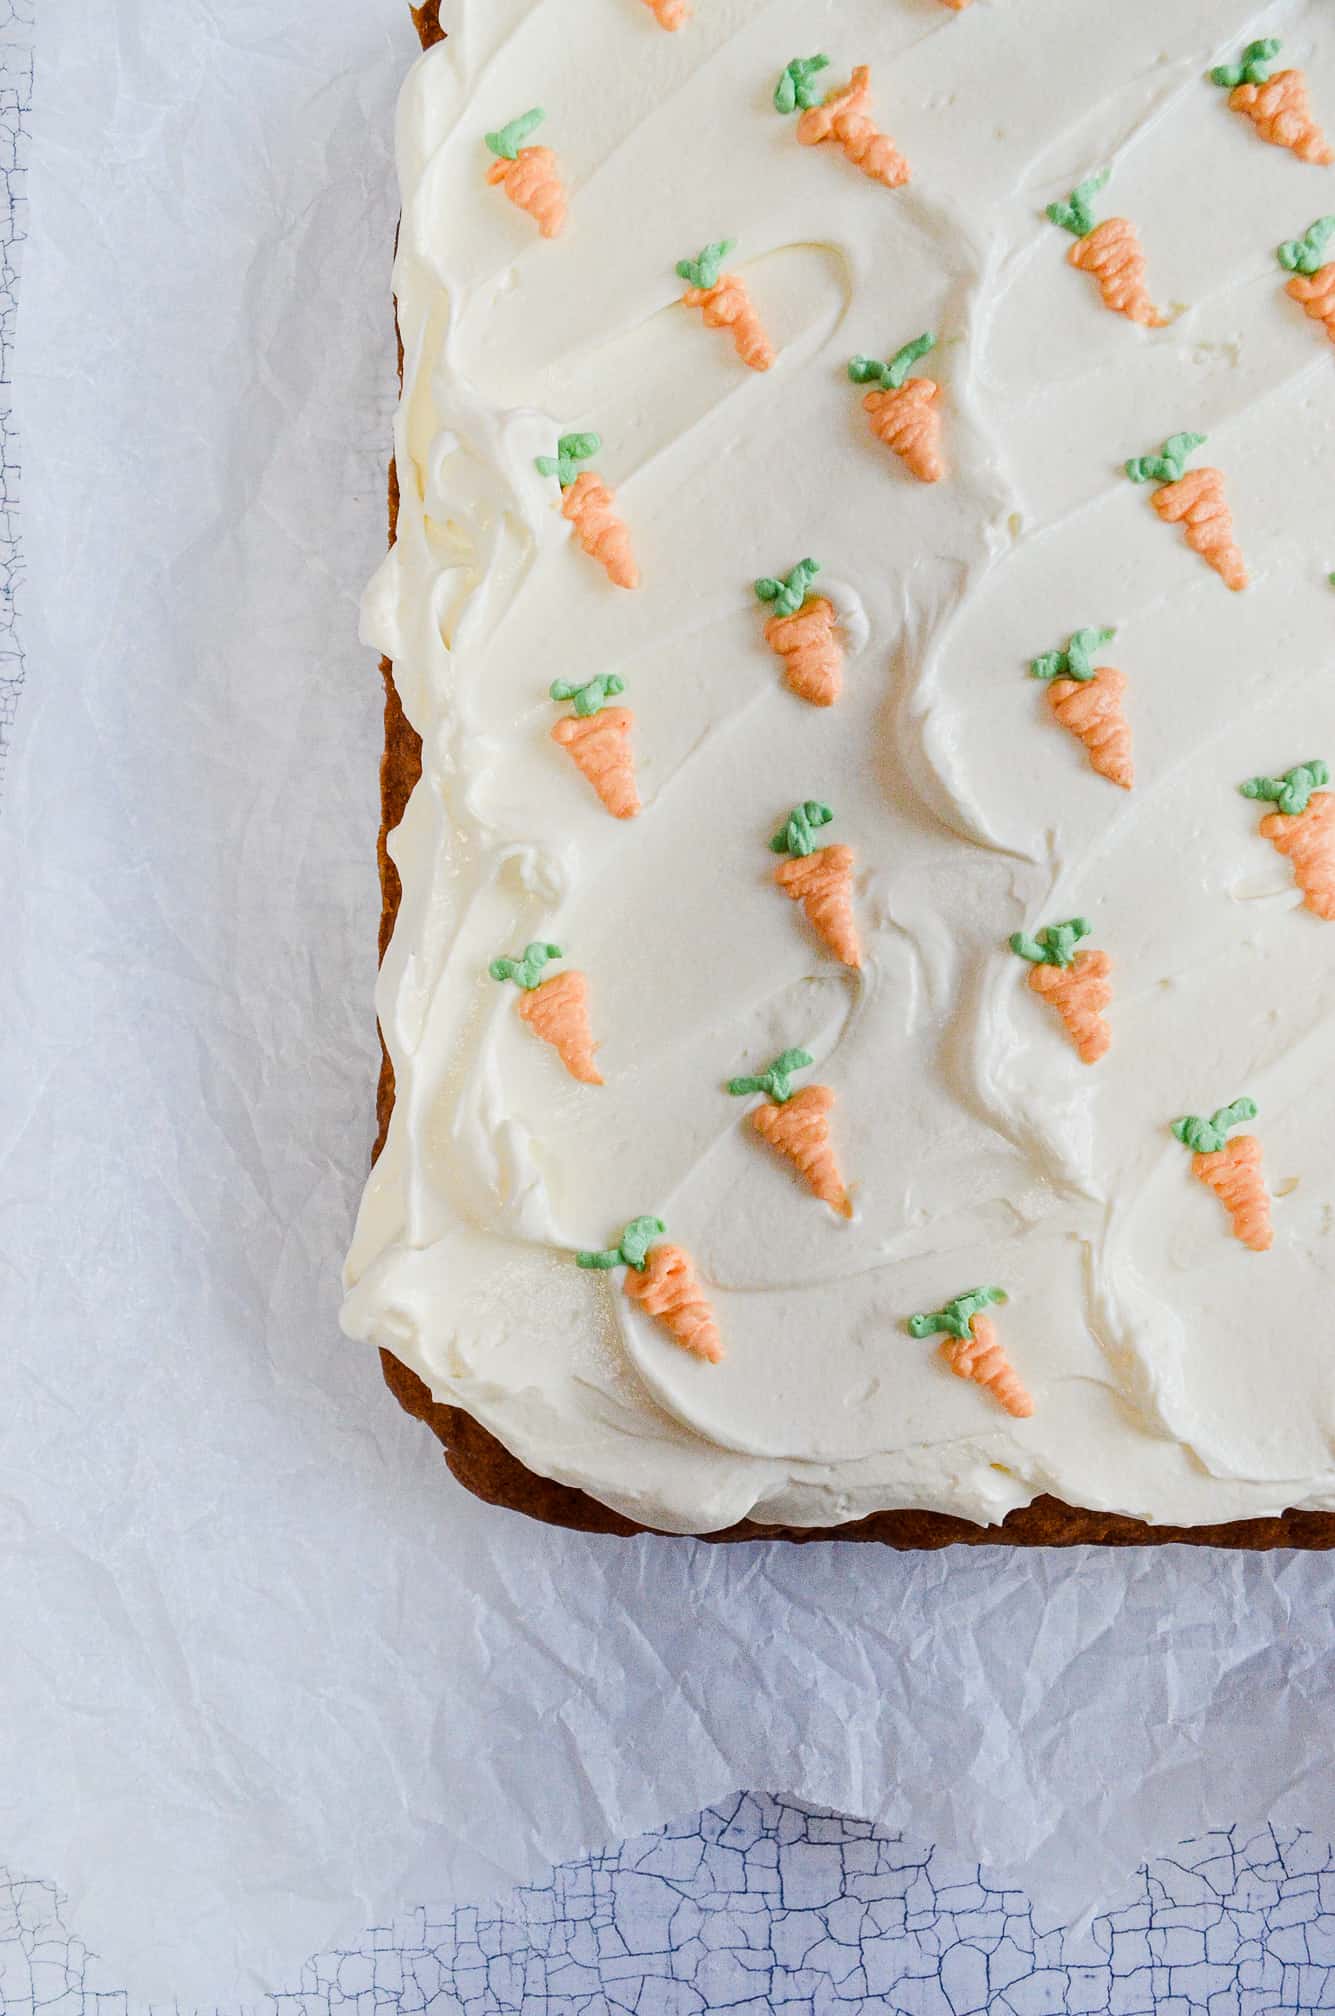 easter carrot decorations on cake